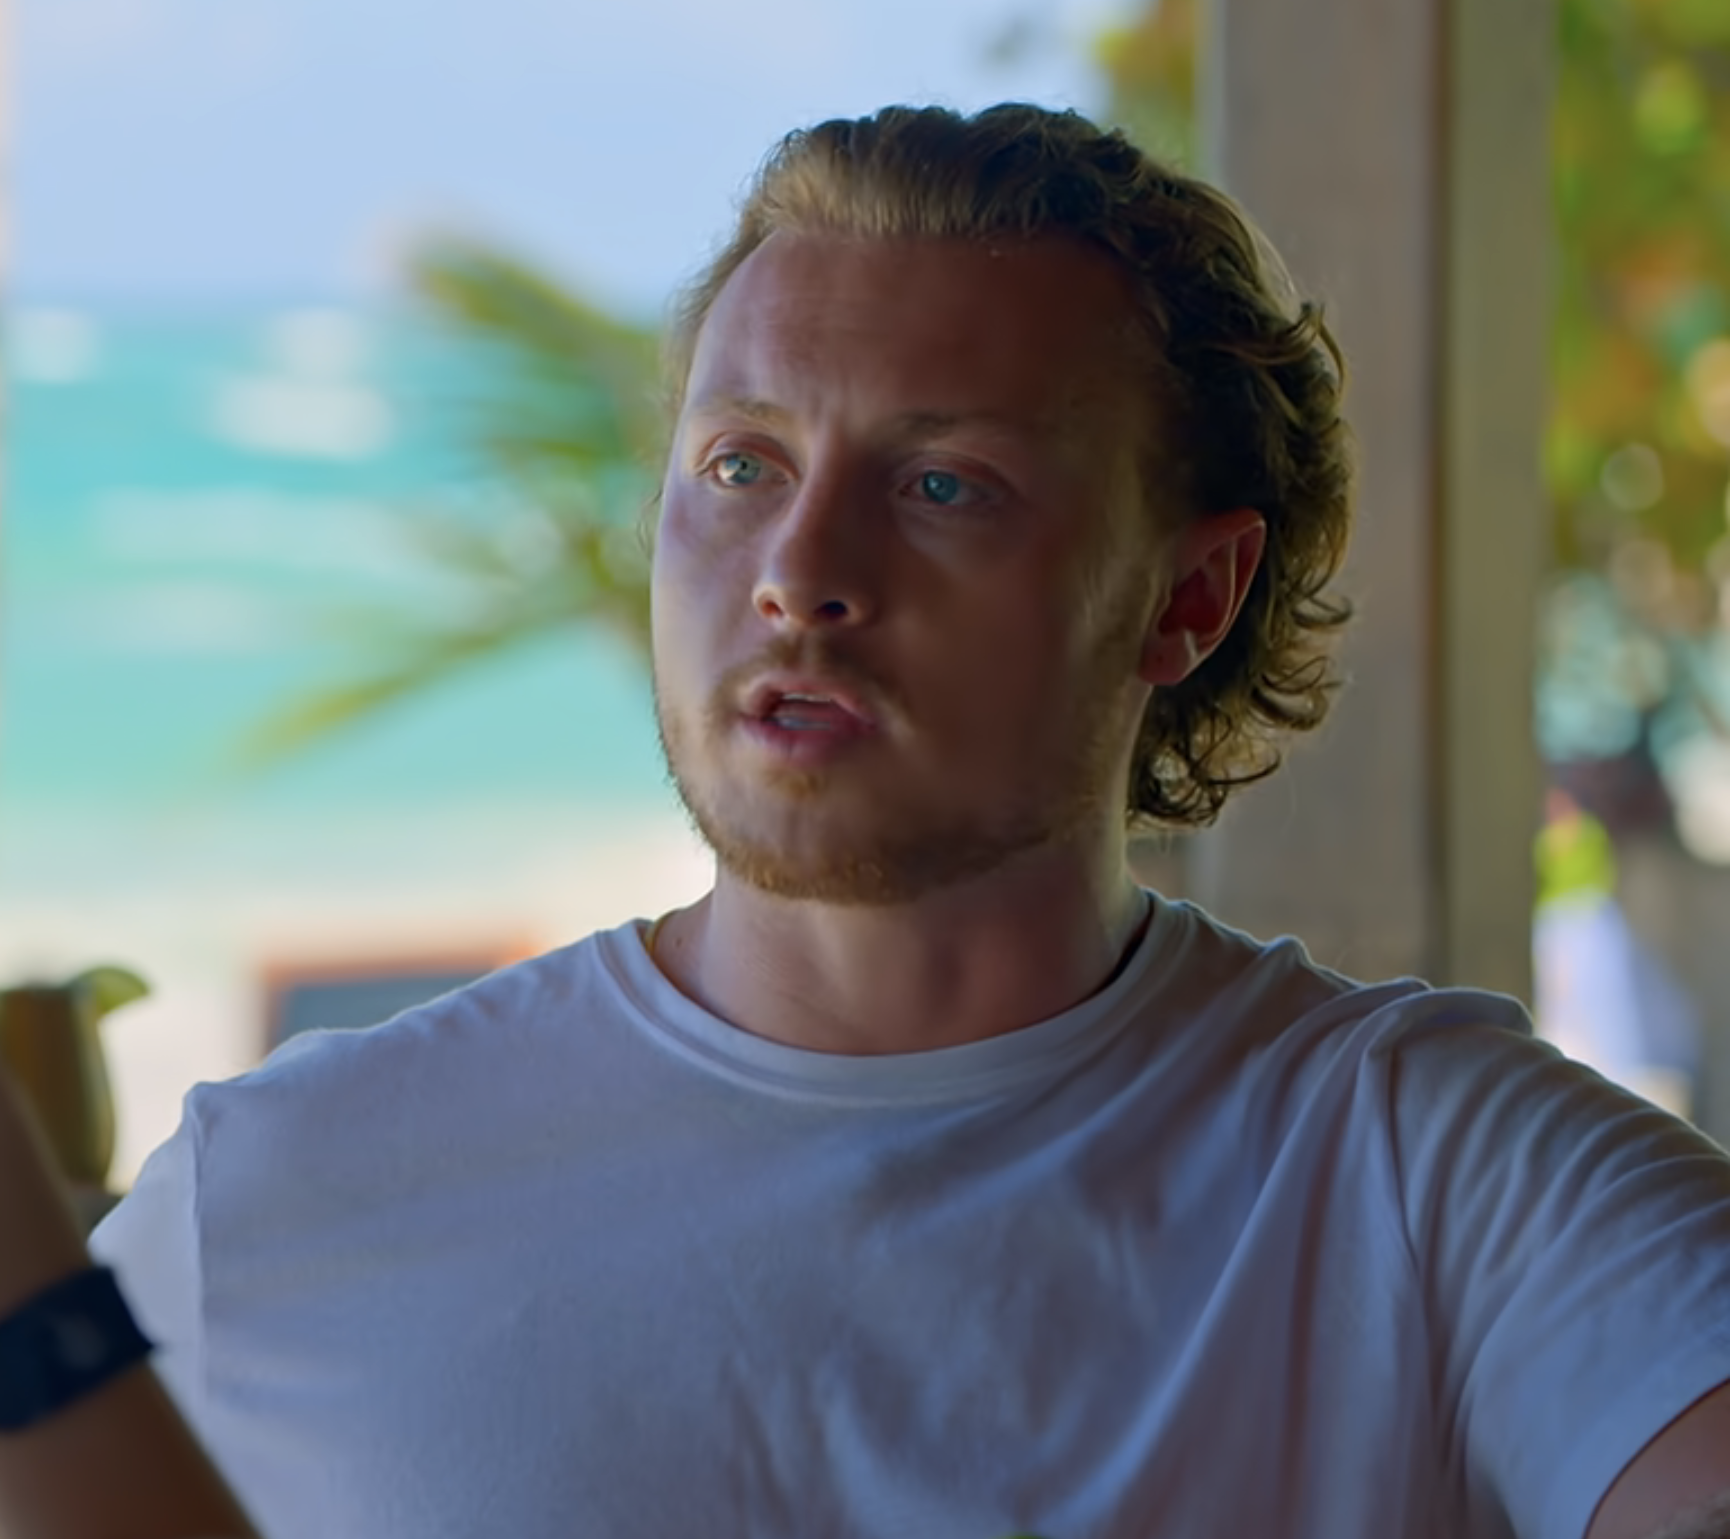 Johnny in a T-shirt and talking to another whose reflection is seen in a mirror, with a tropical backdrop visible through a window